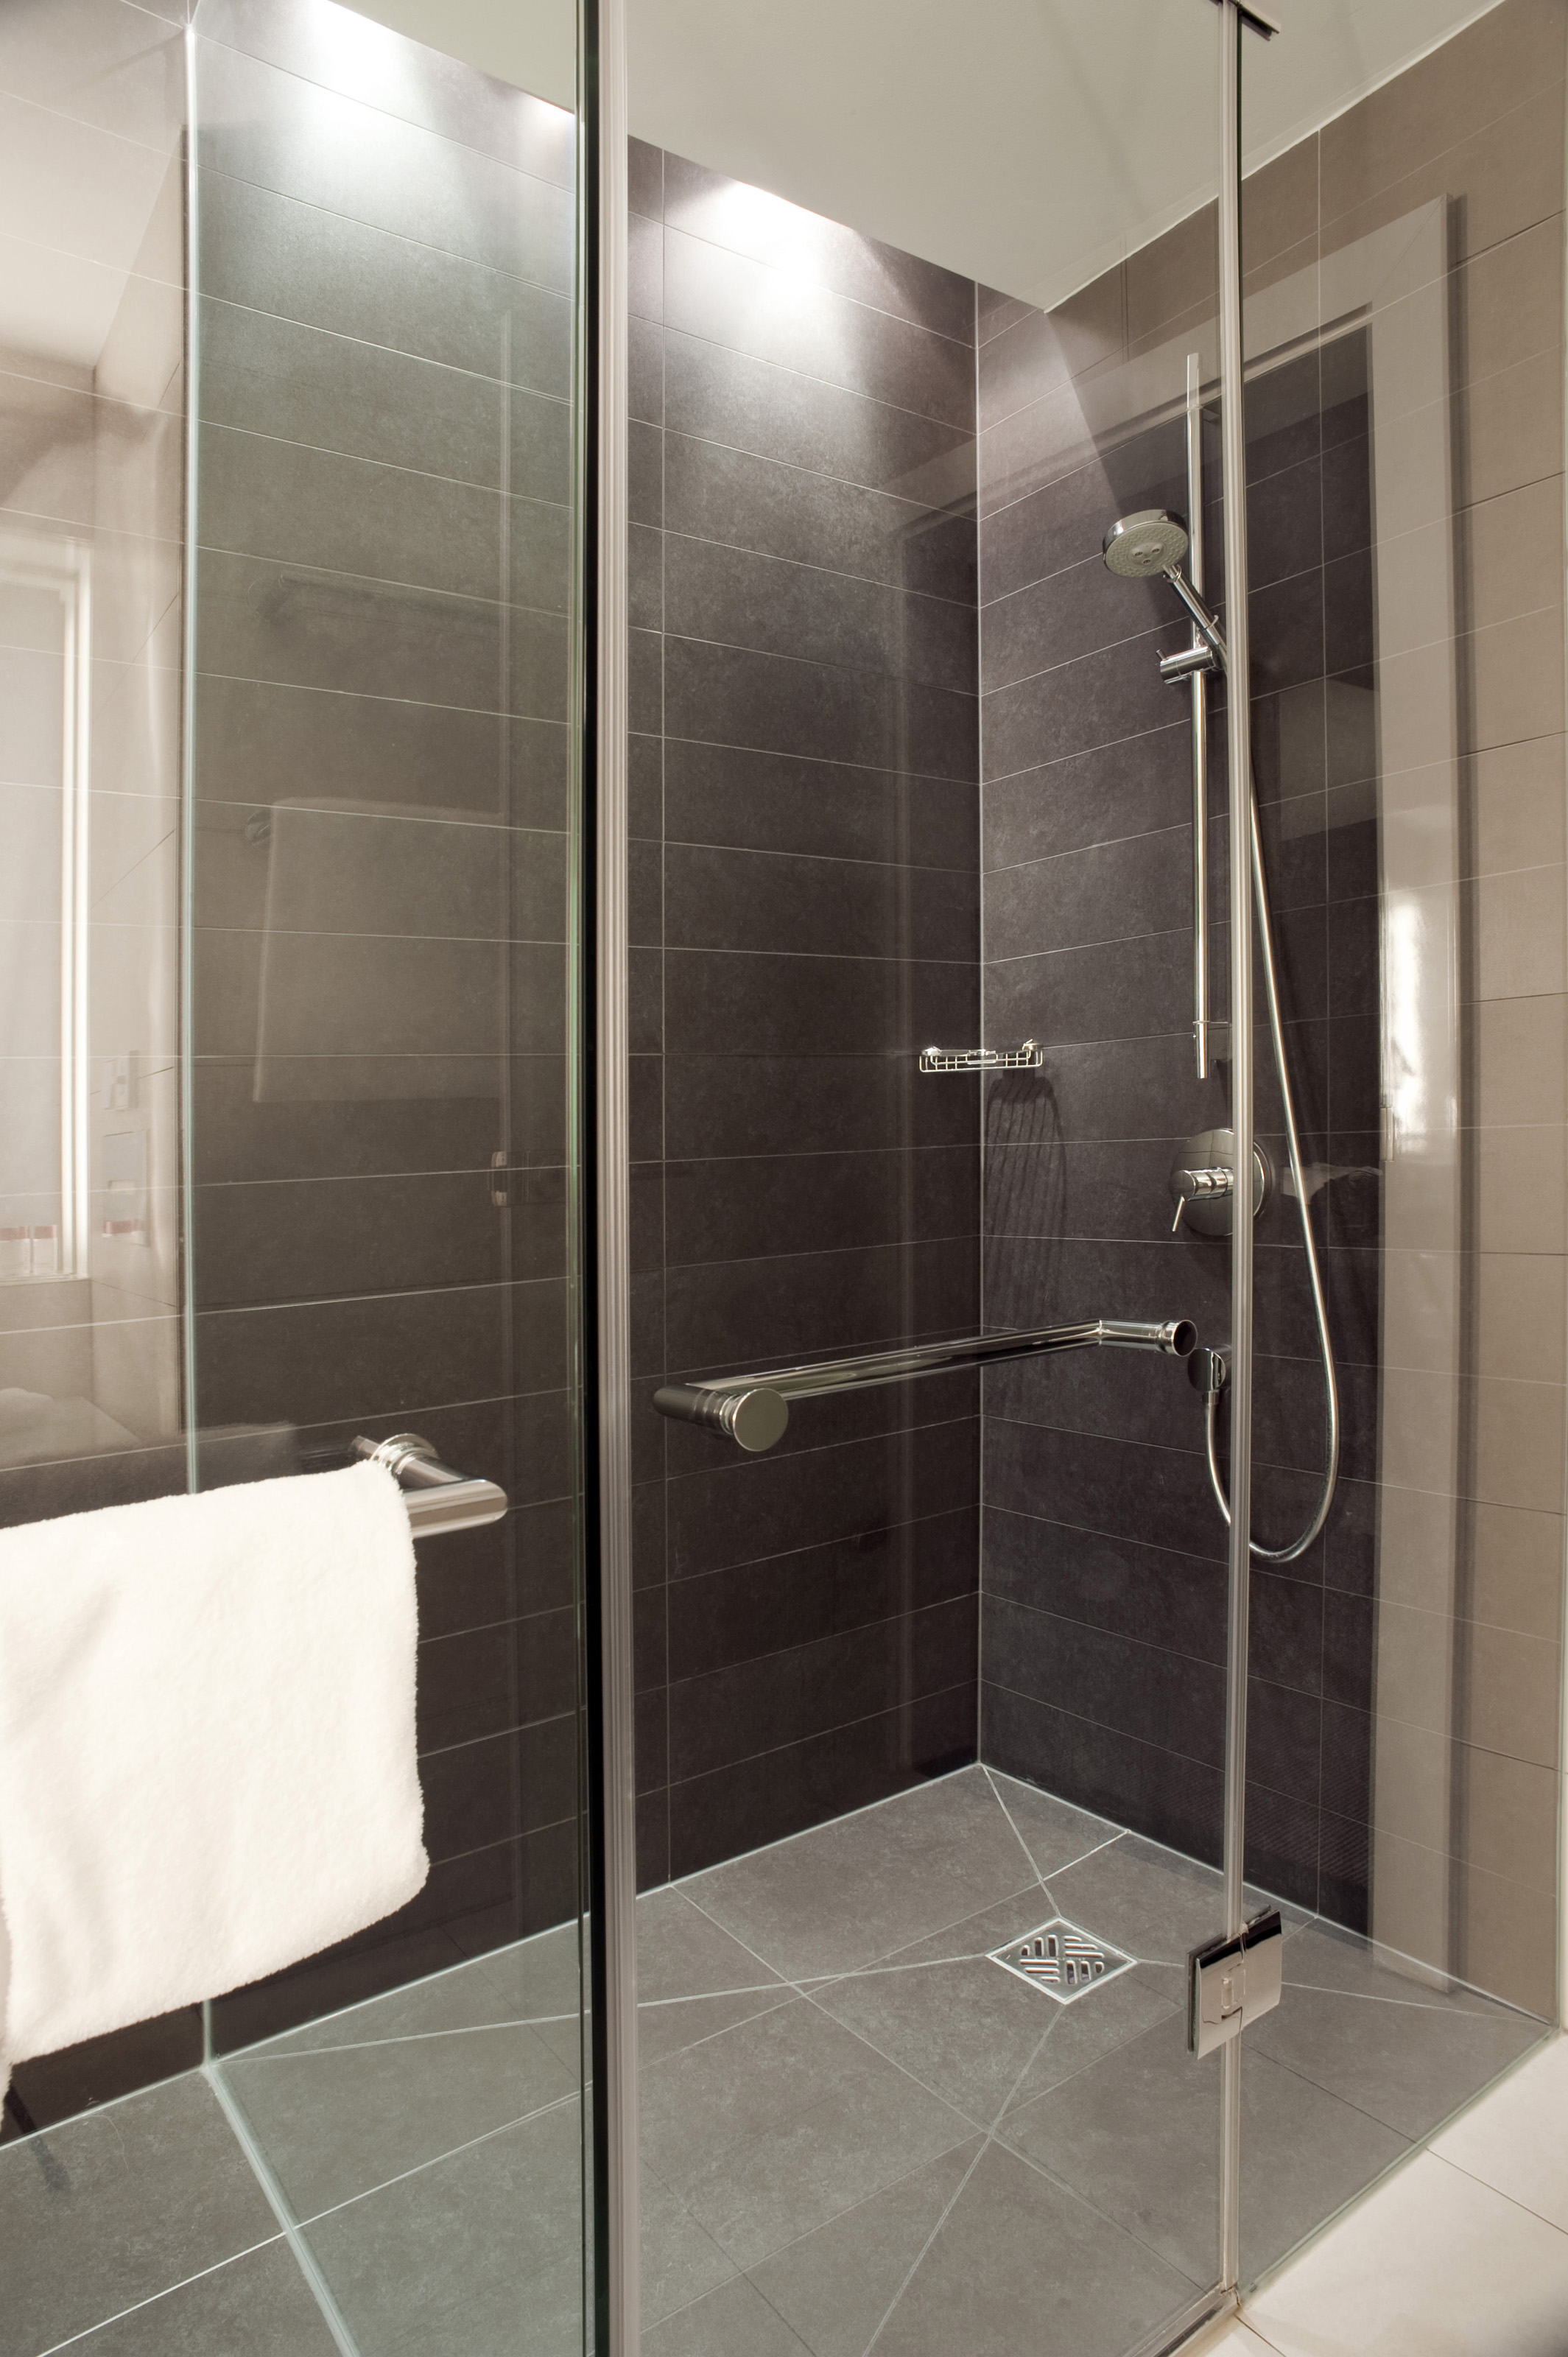 Free Stock Photo 6930 Glass shower cubicle | freeimageslive